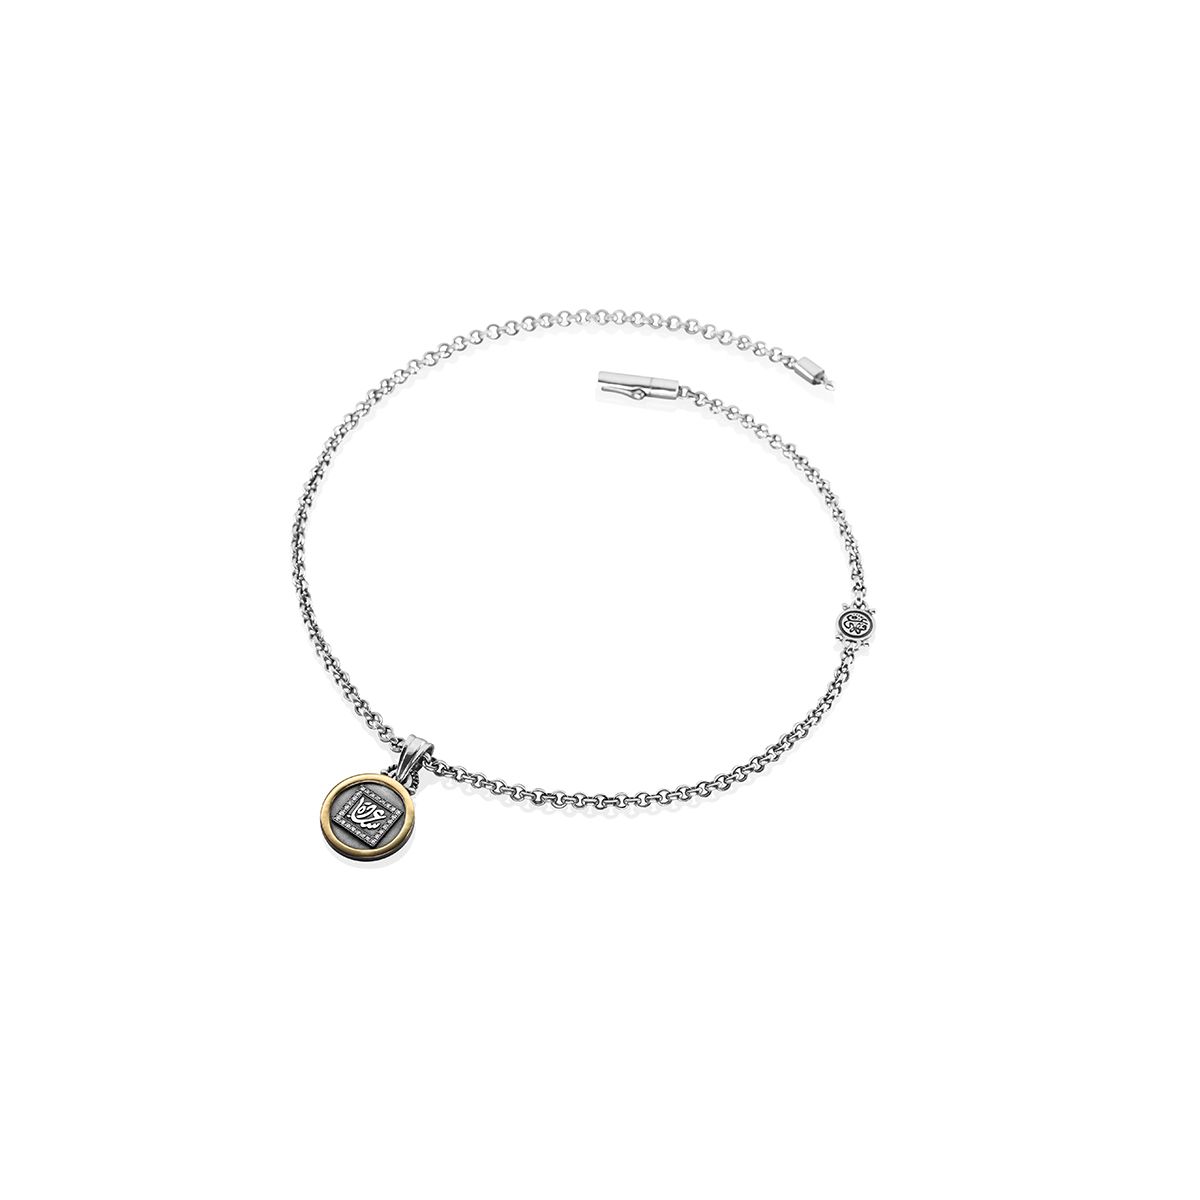 Happiness Charm Necklace by Azza Fahmy - Designer Necklaces